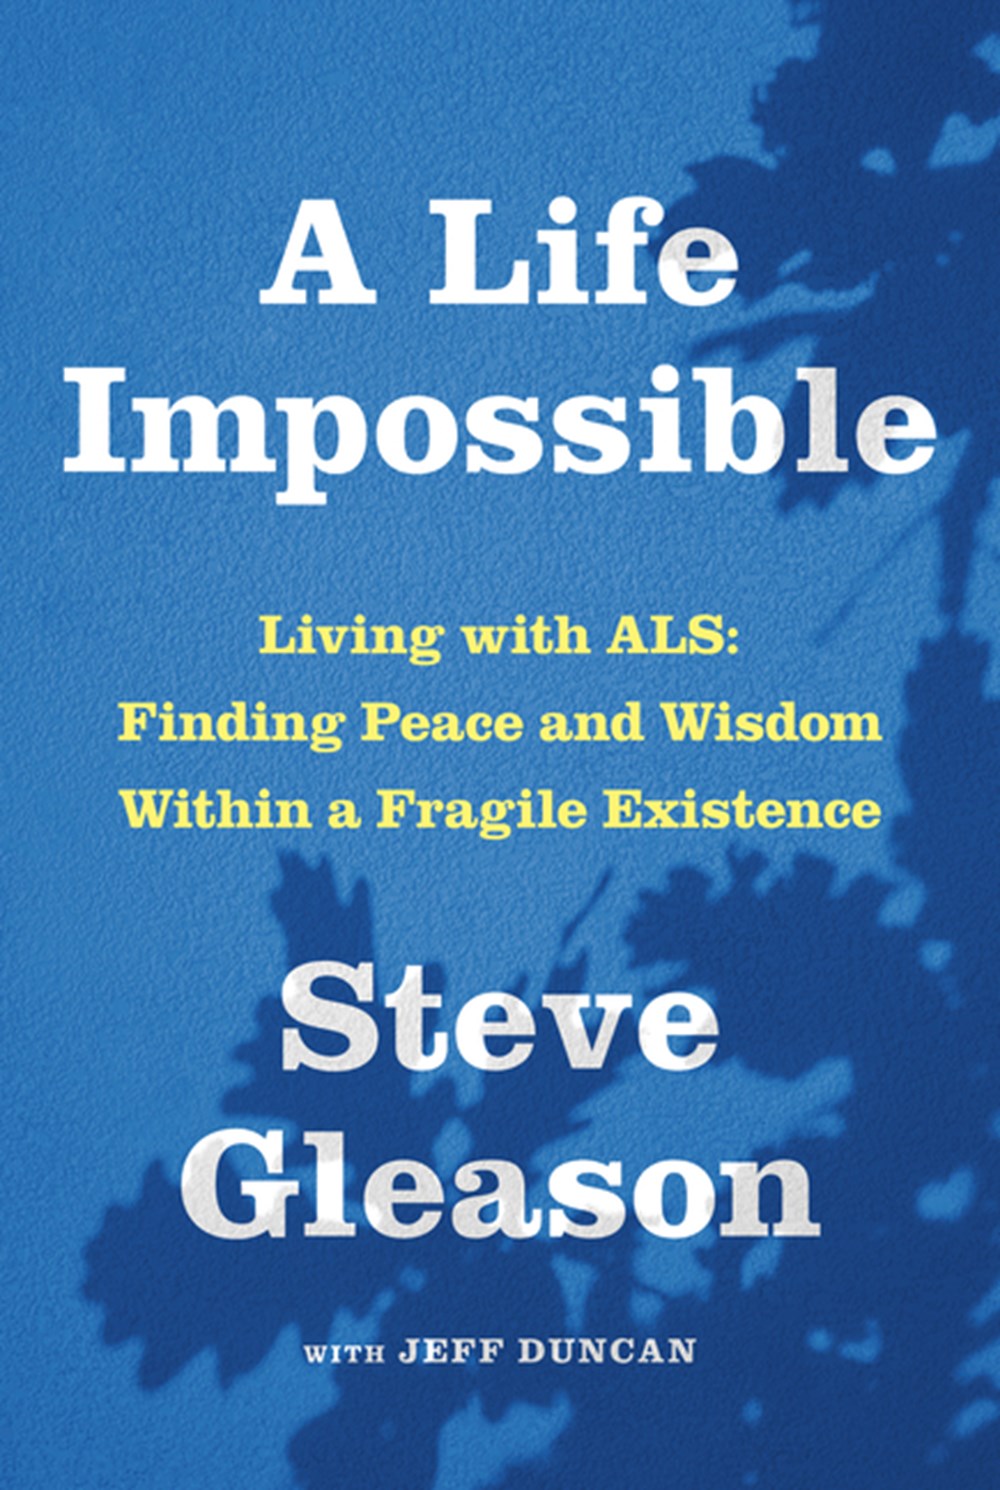 Life Impossible: Living with Als: Finding Peace and Wisdom Within a Fragile Existence